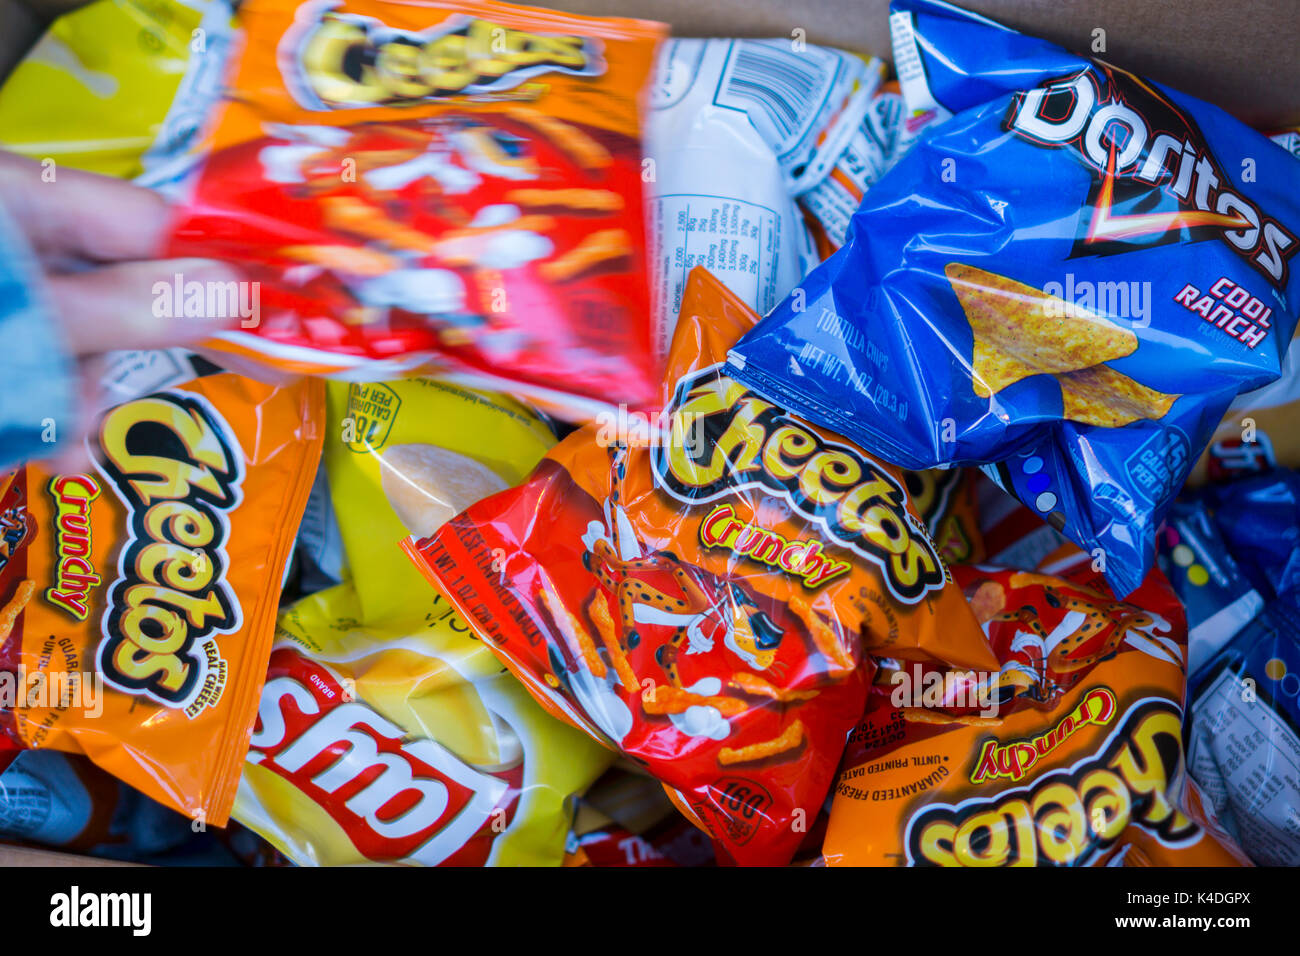 A display of tasty Frito-Lay brand chips and snacks in a supermarket in New York on Thursday, August 31, 2017. Frito-Lay is a brand of Pepsico. (© Richard B. Levine) Stock Photo